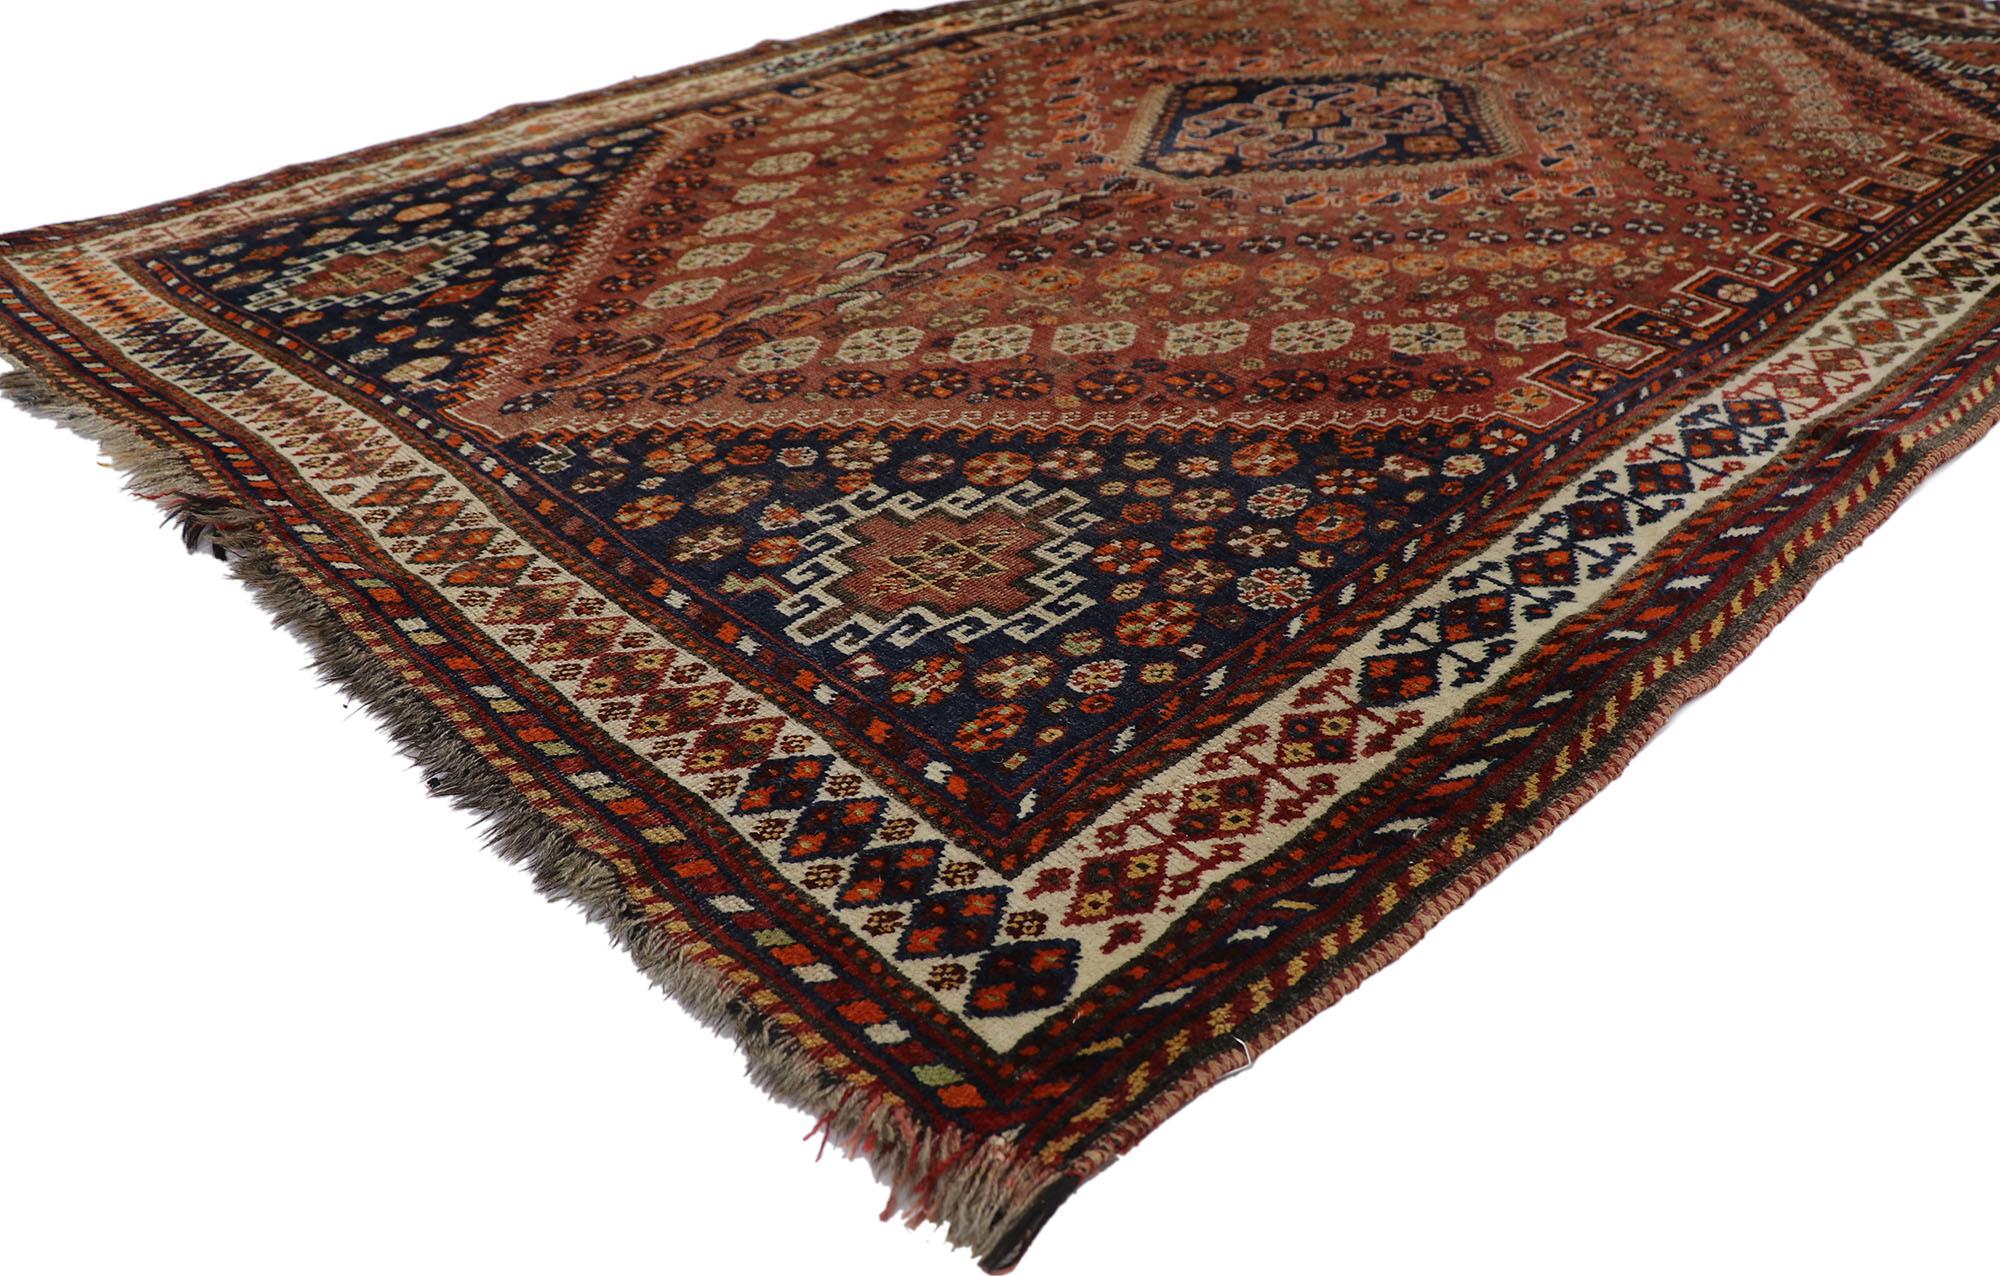 21698, antique Persian Shiraz rug with Mid-Century Modern Tribal style. With its rustic sensibility and tribal style, this hand-knotted wool antique Persian Shiraz rug will take on a curated lived-in look that feels timeless while imparting a sense